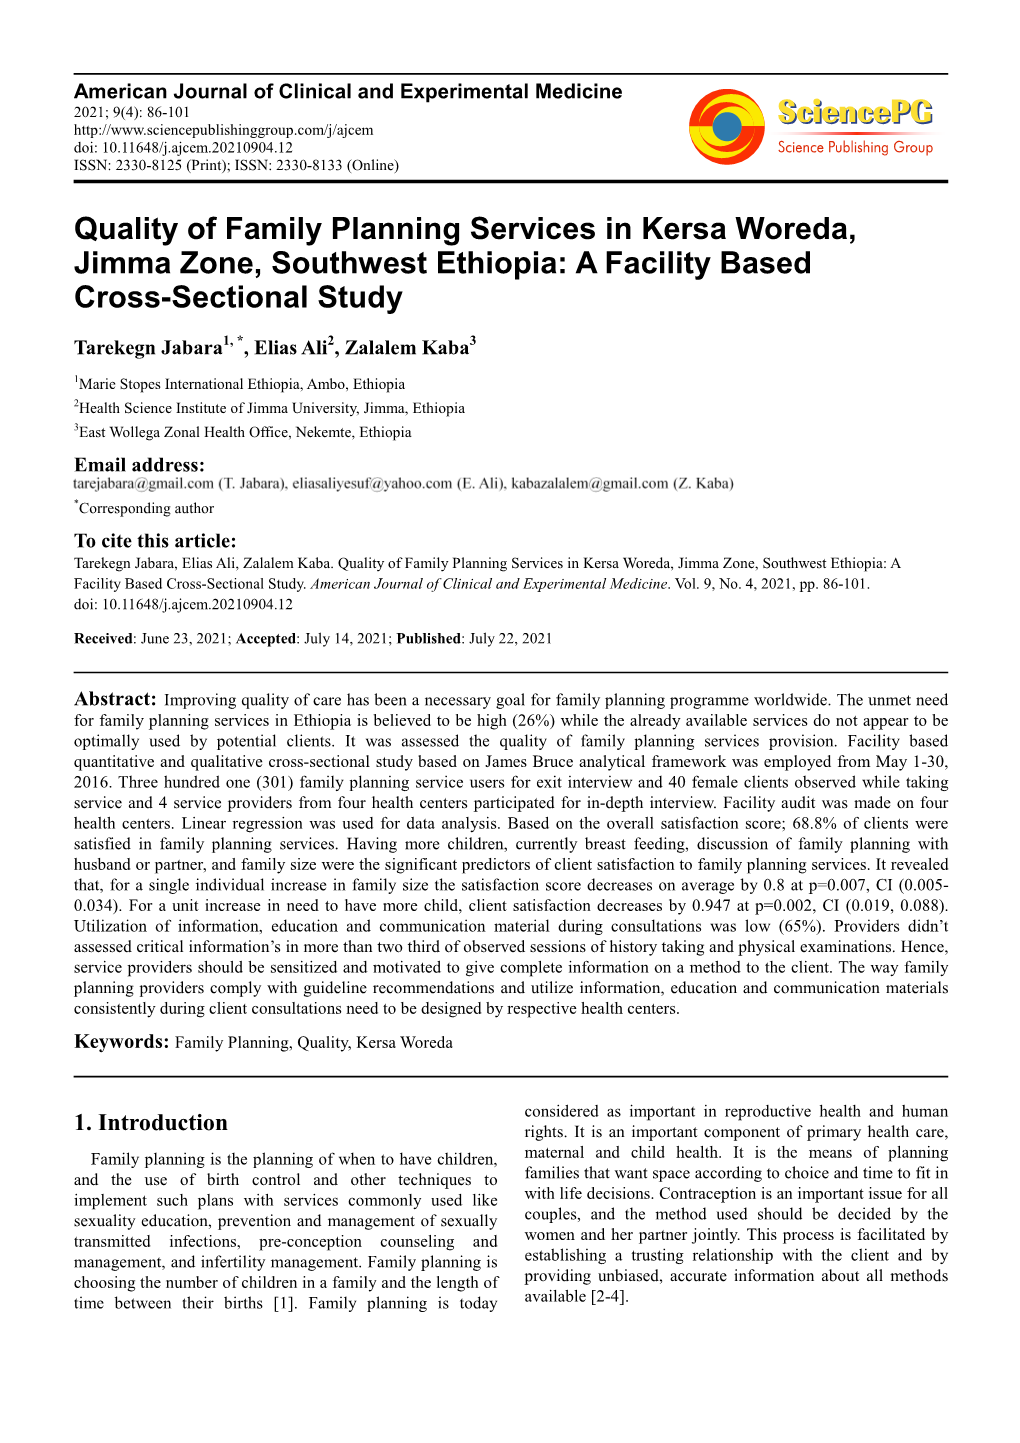 Quality of Family Planning Services in Kersa Woreda, Jimma Zone, Southwest Ethiopia: a Facility Based Cross-Sectional Study